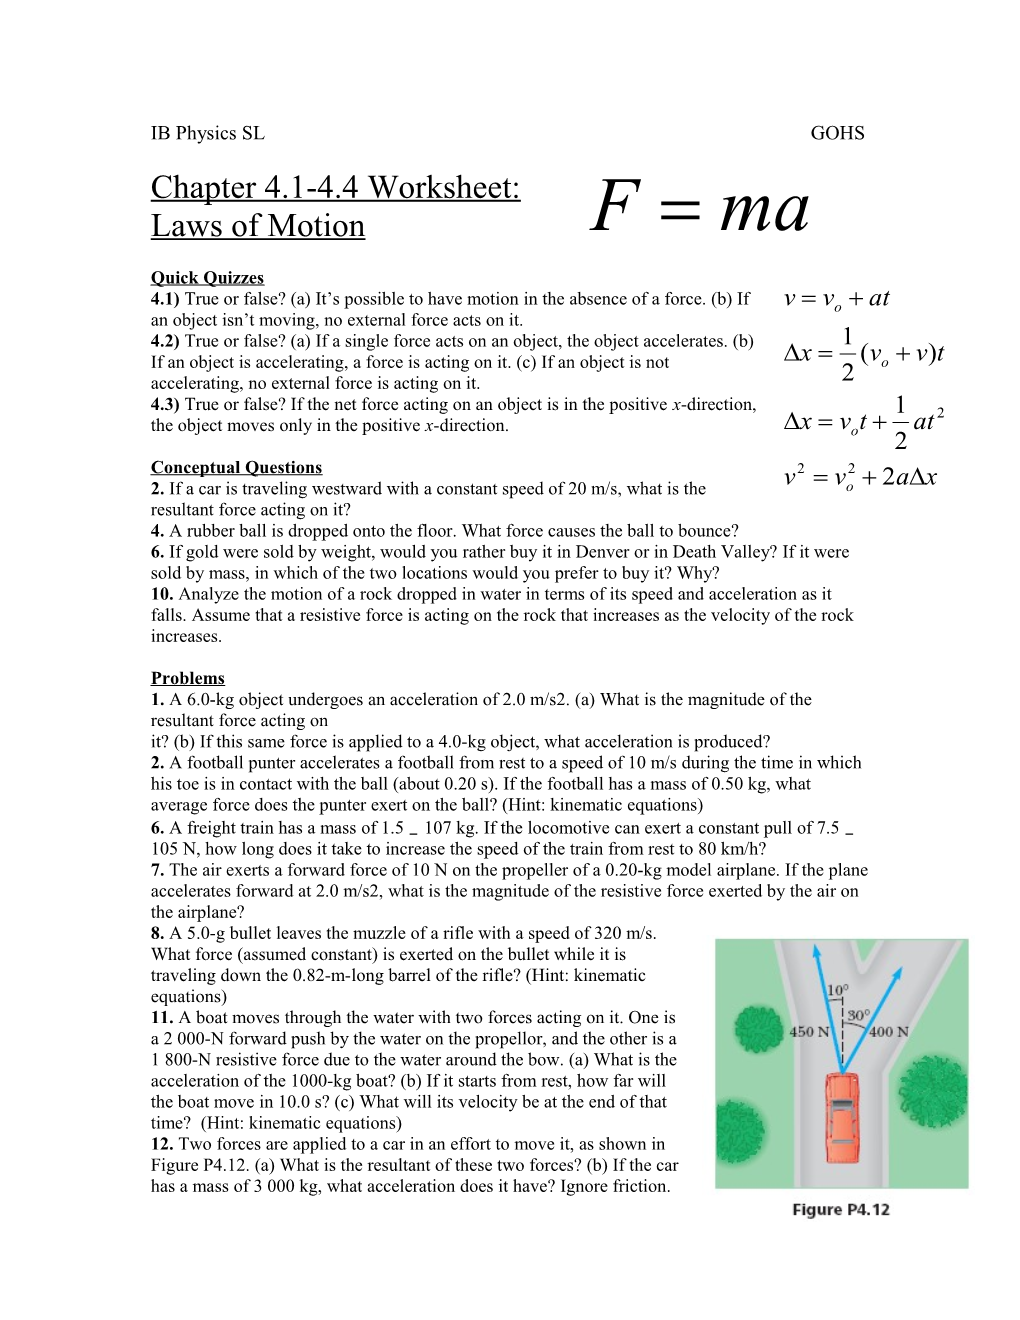 Chapter 4.1-4.4 Worksheet: Laws of Motion